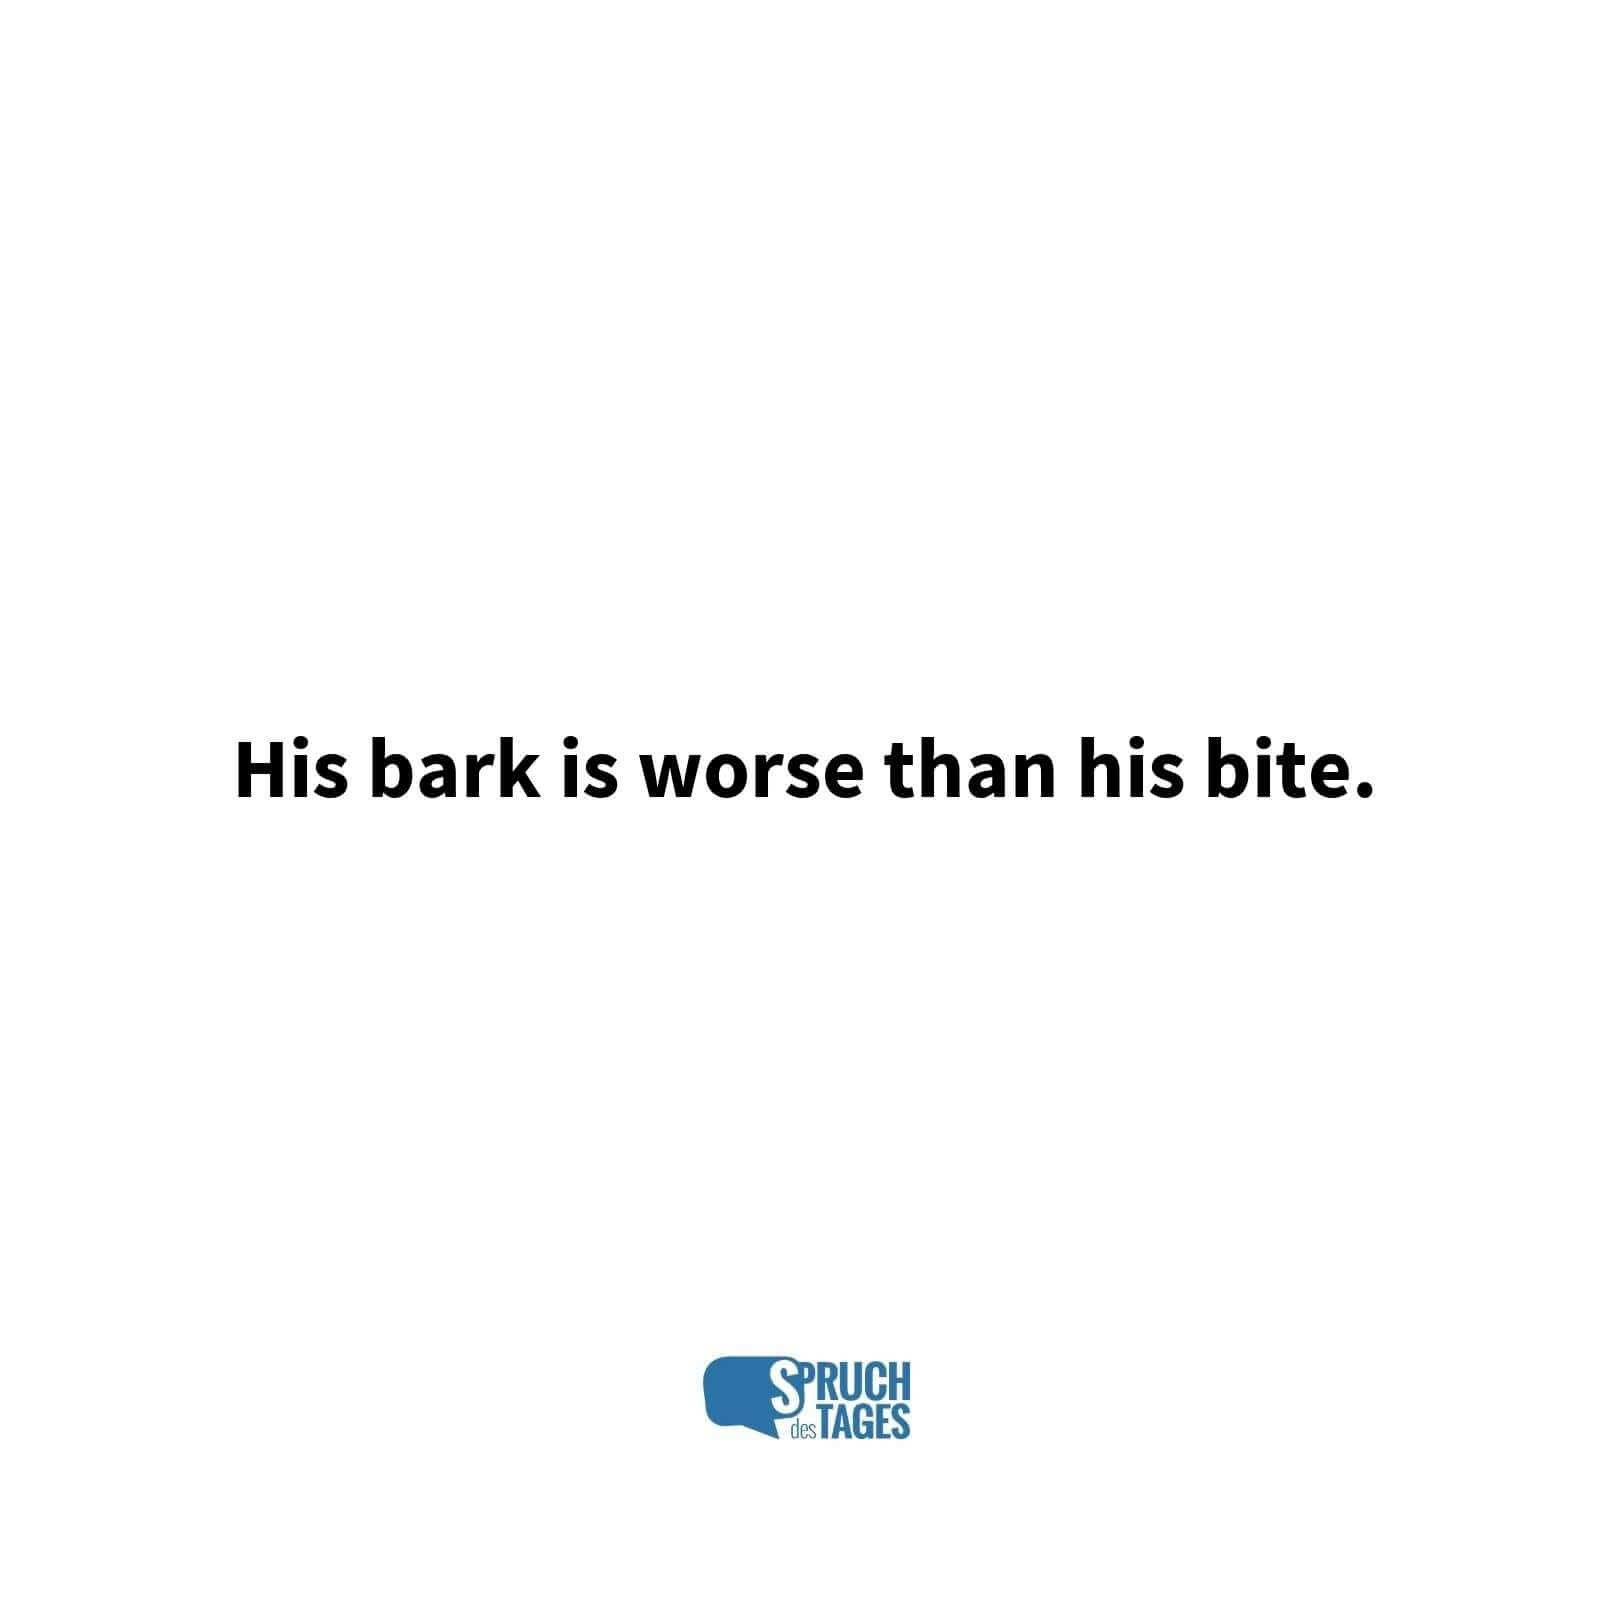 His bark is worse than his bite.